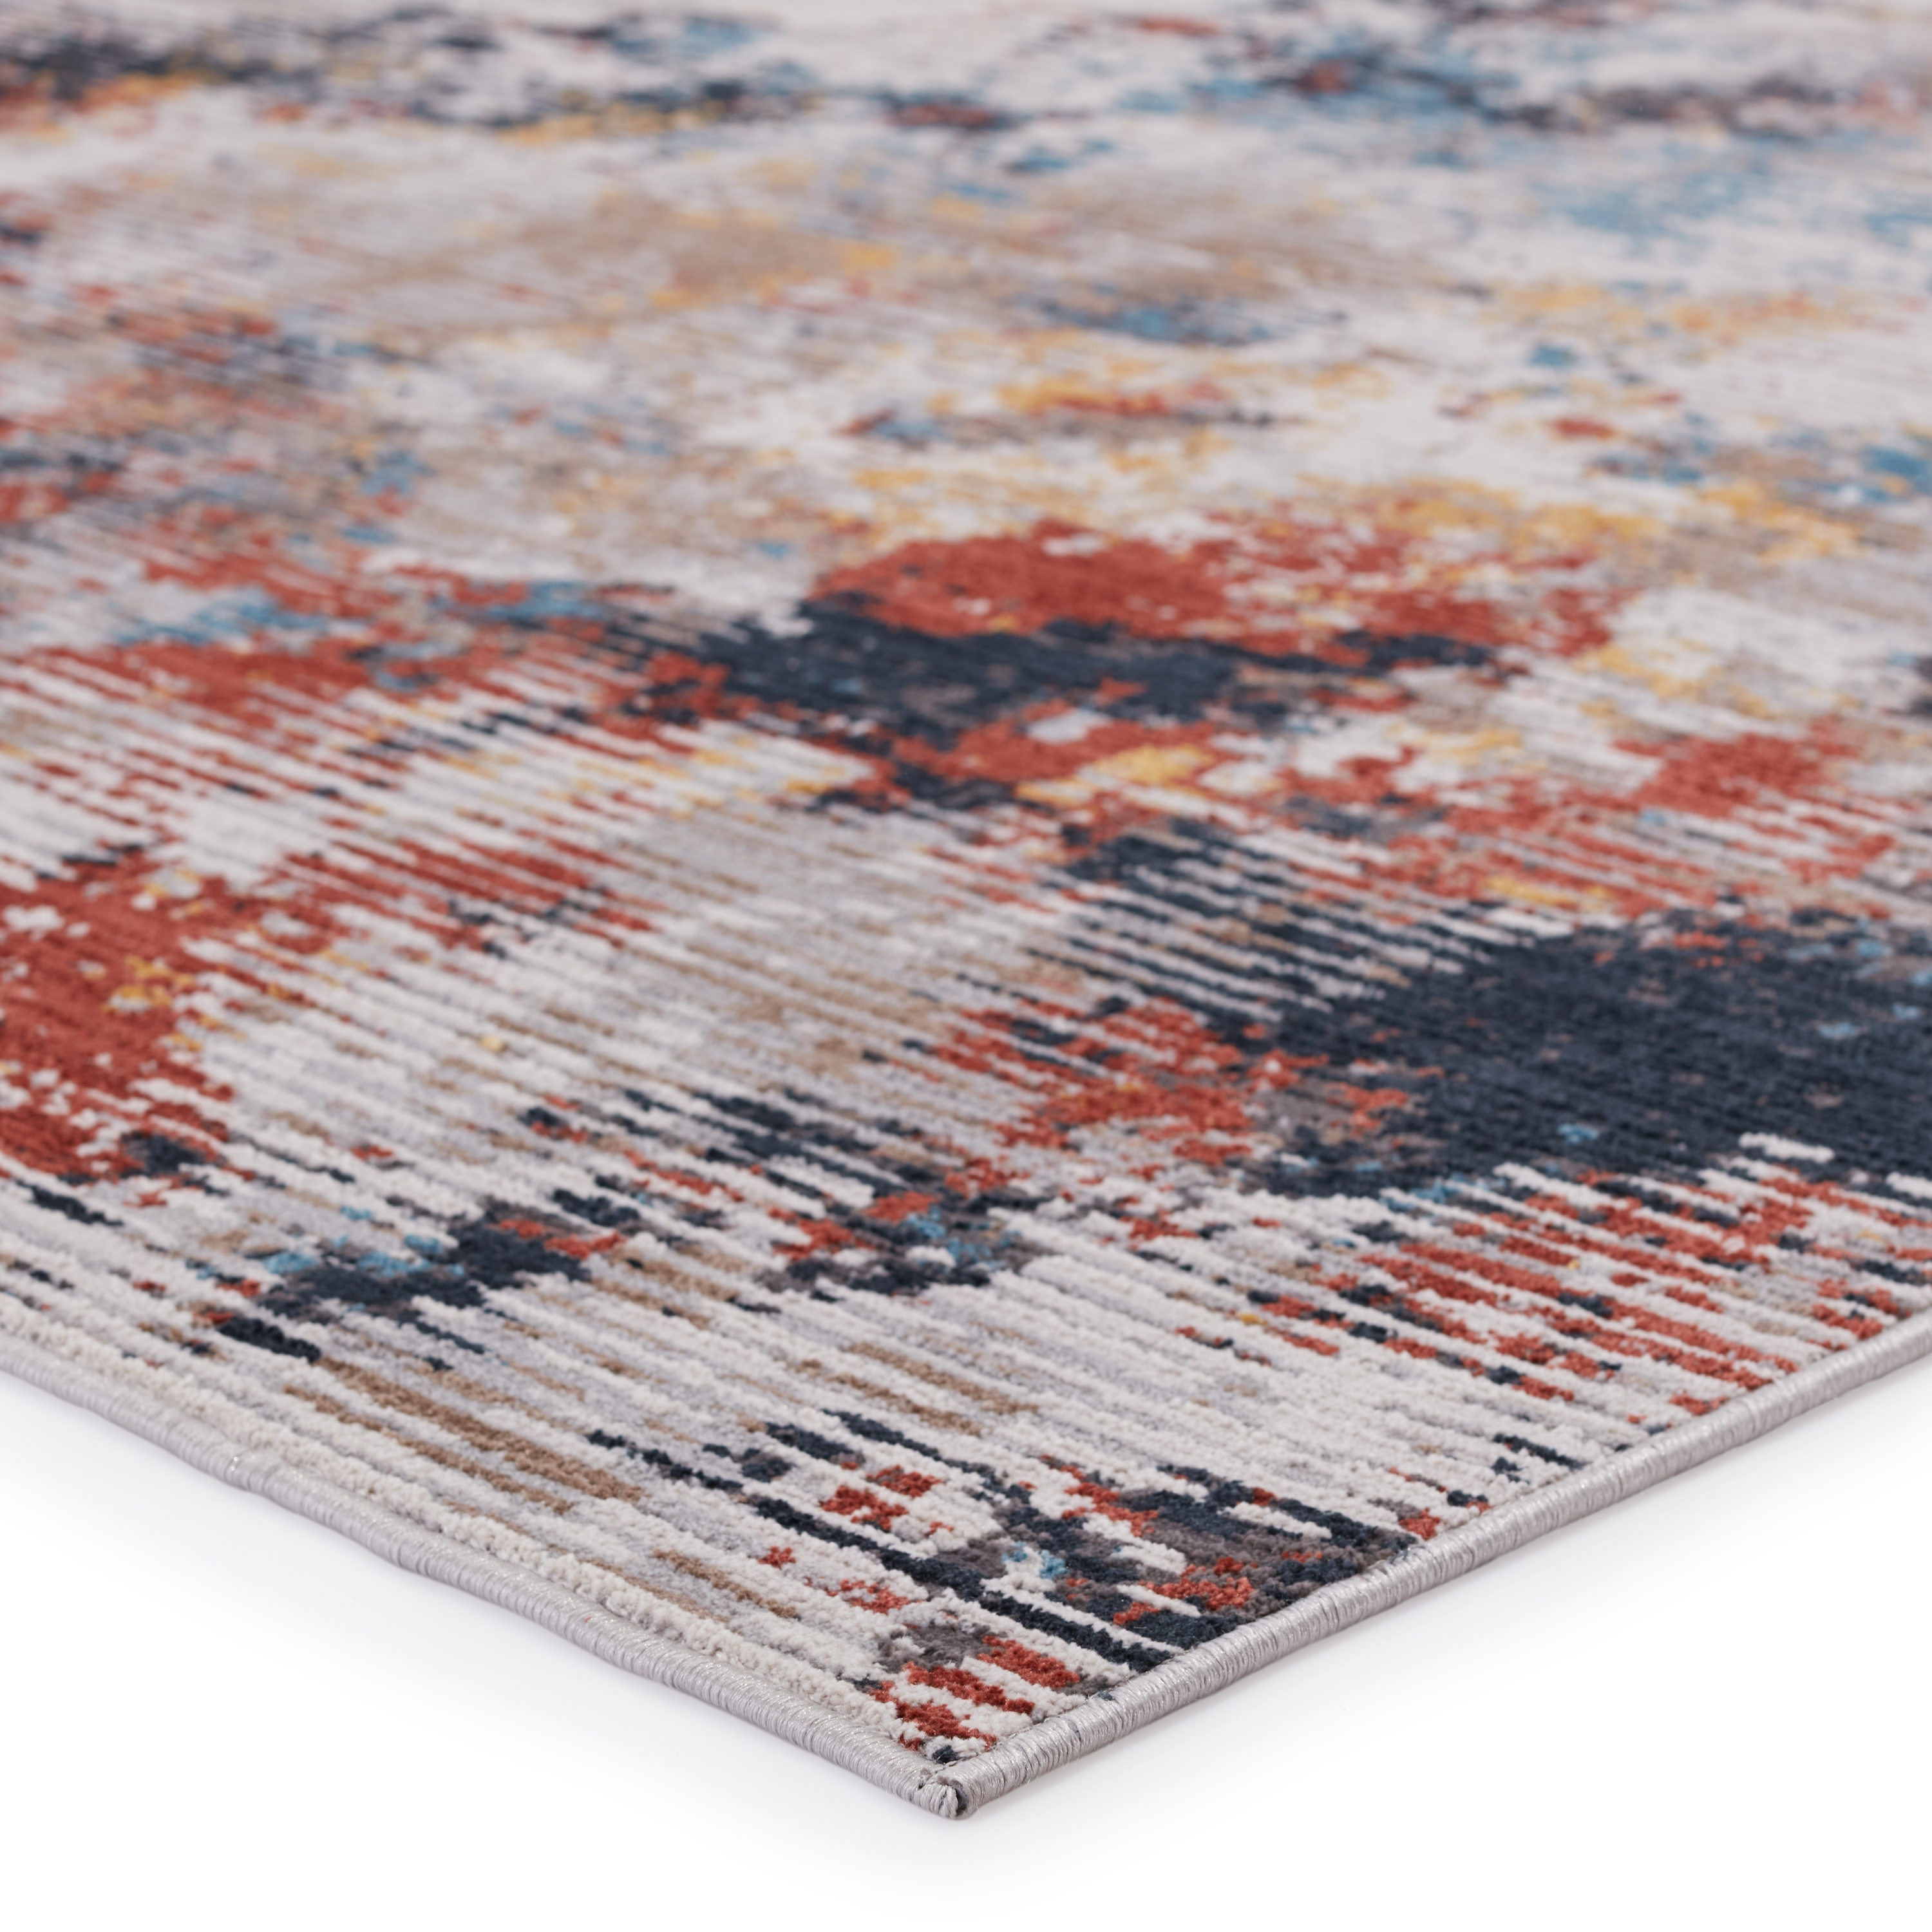 Vibe by Bardane Abstract Multicolor Area Rug (5'X8') - Image 1